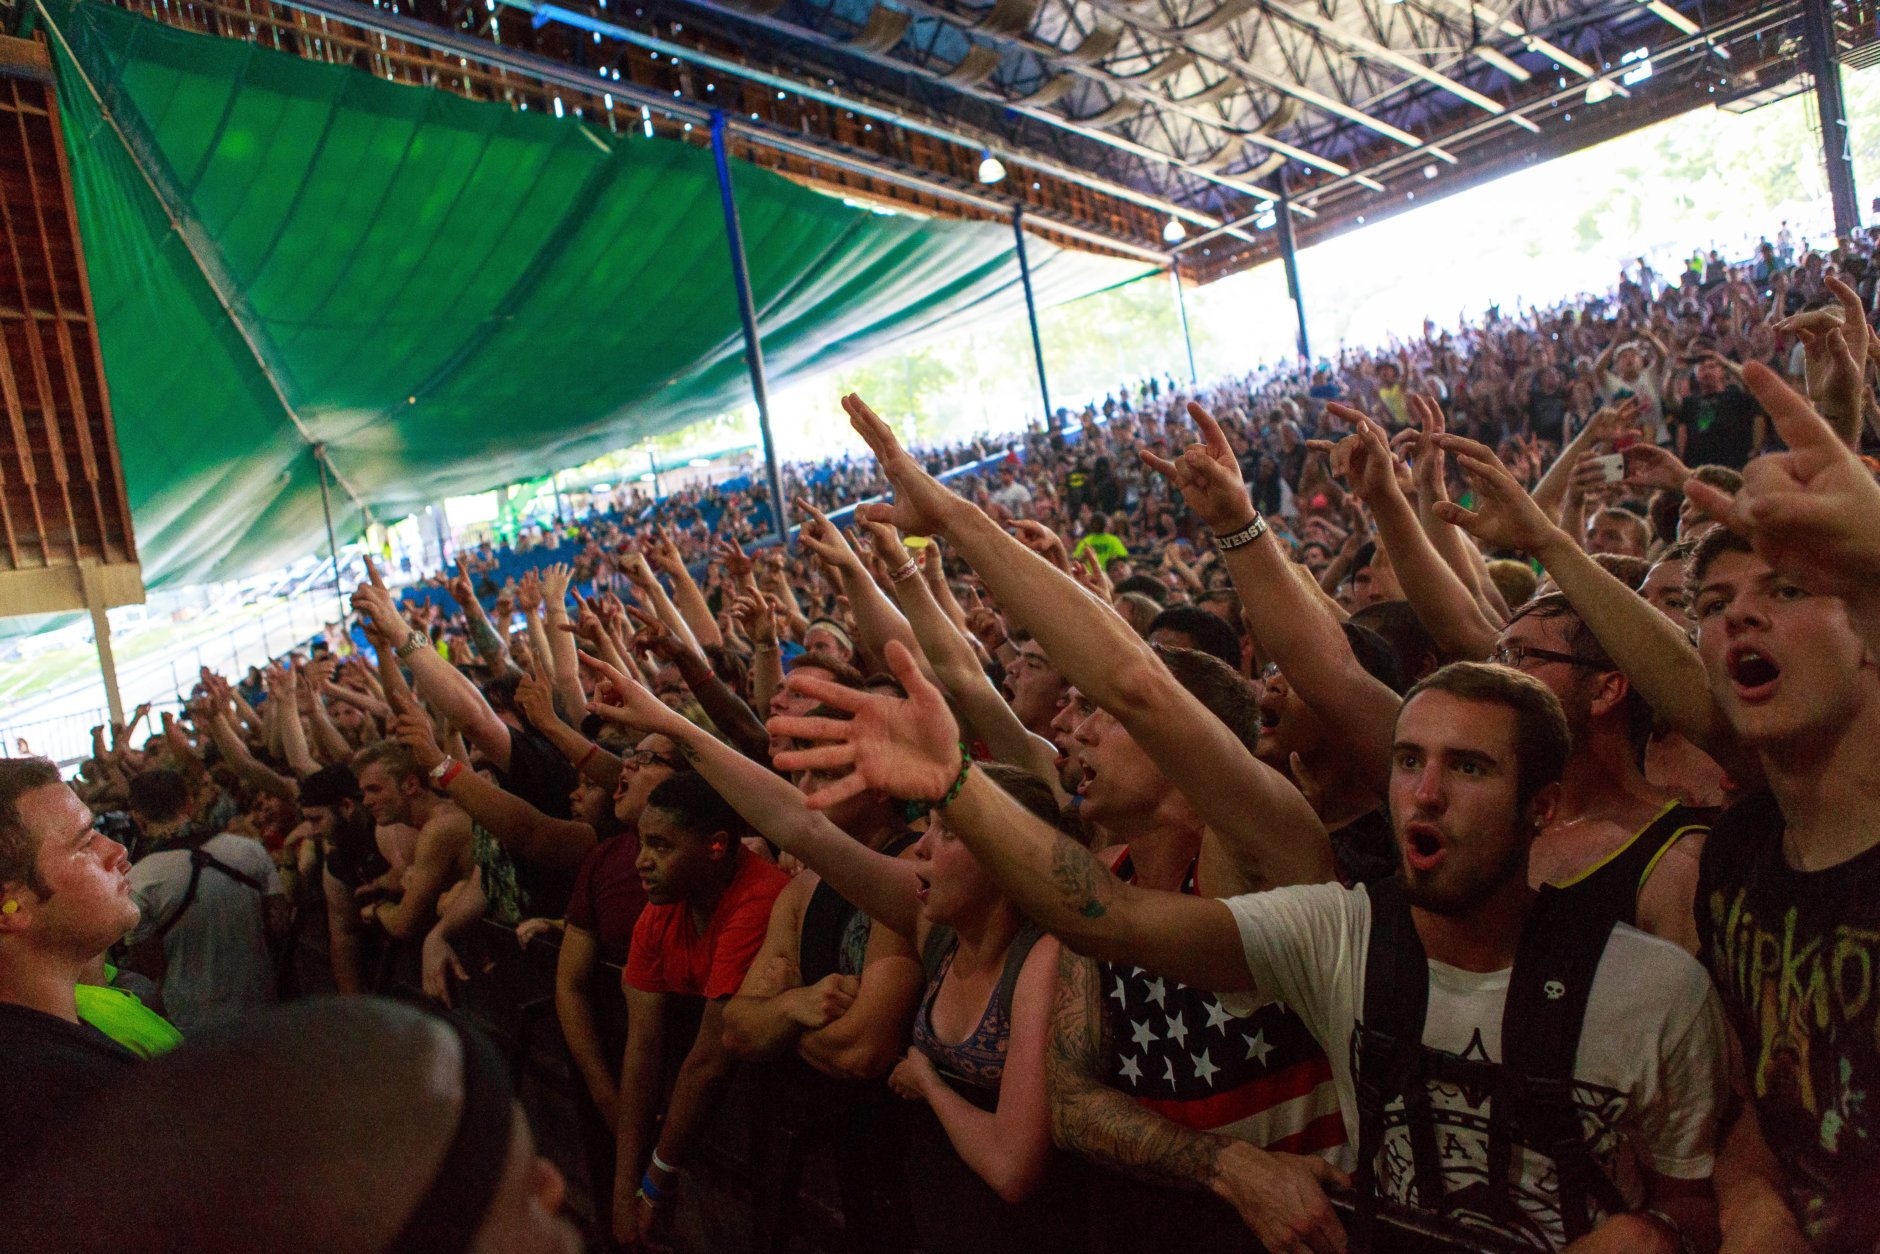 The crowd at Warped Tour 2014. (Will Cocks)